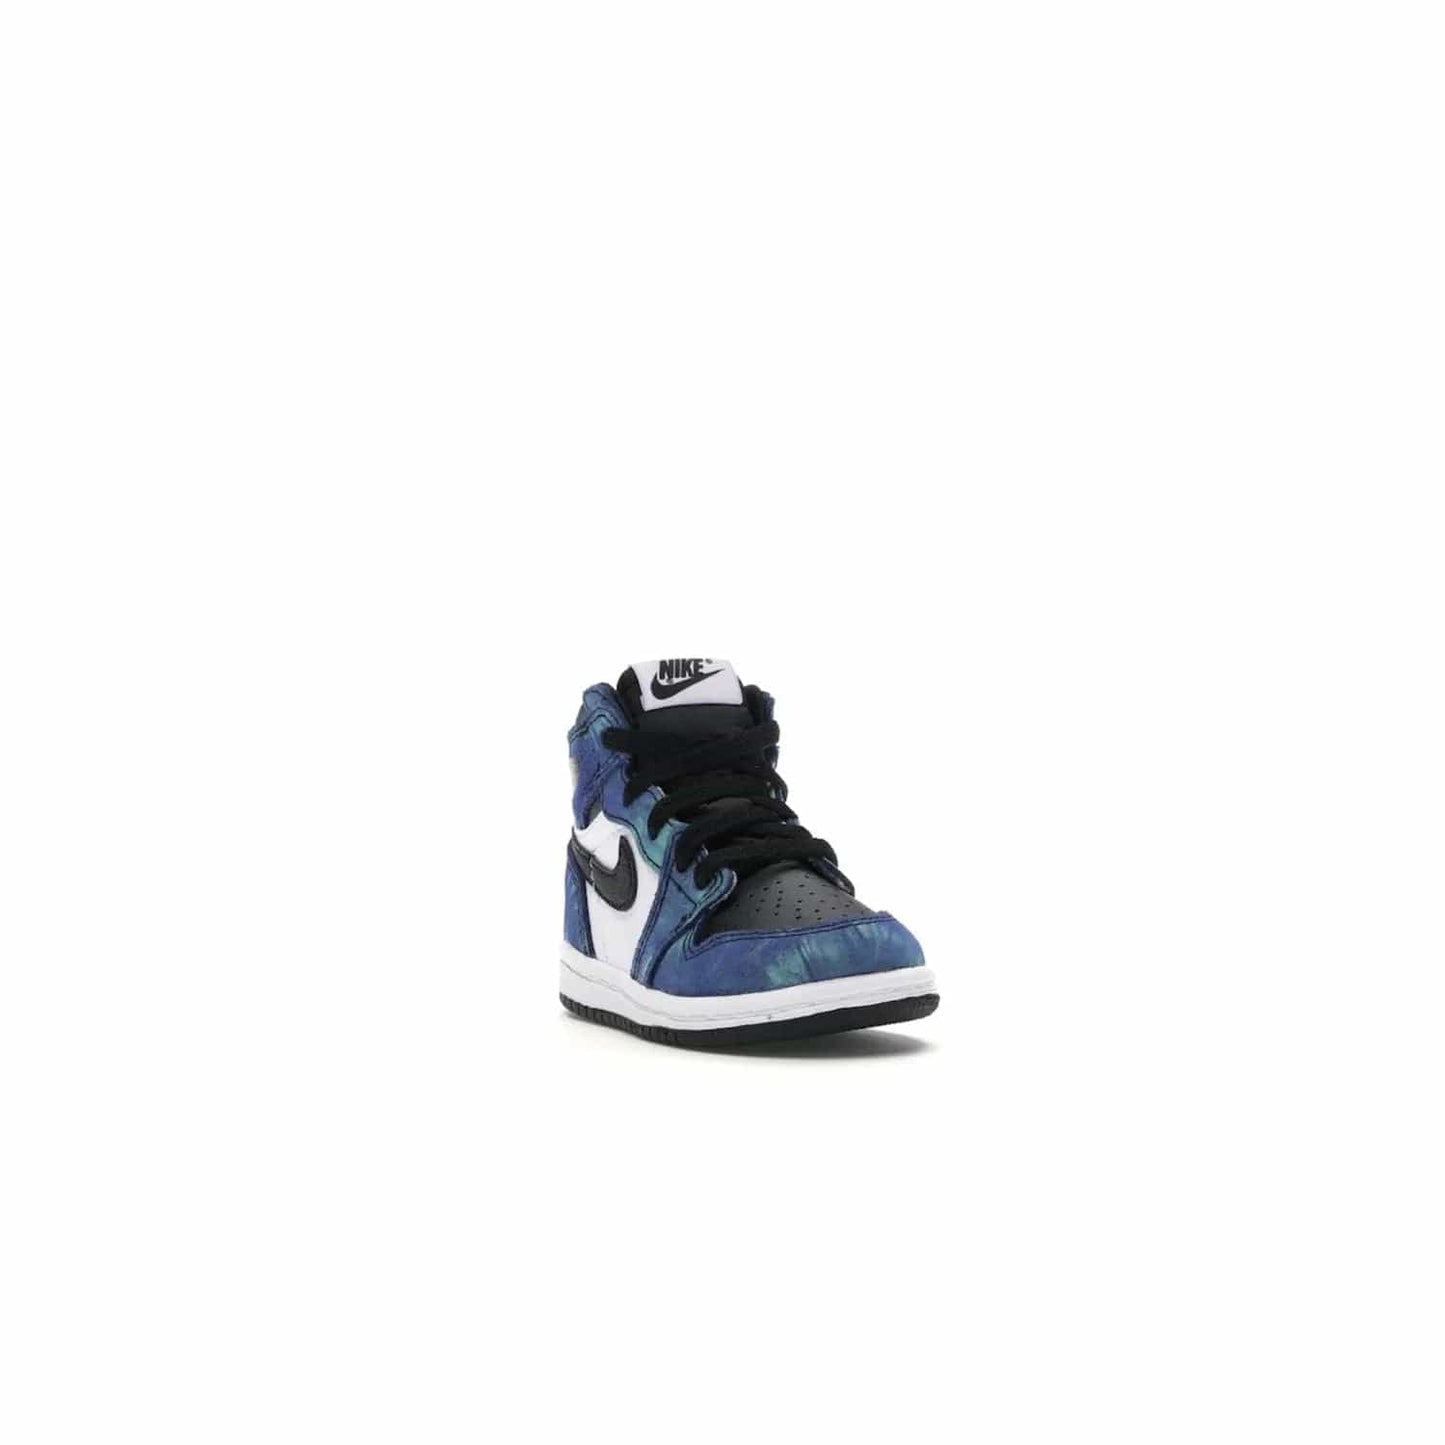 Jordan 1 Retro High Tie Dye (TD) - Image 7 - Only at www.BallersClubKickz.com - Add a unique twist to your sneaker collection with the Jordan 1 Retro High Tie Dye (TD). Classic Air Jordan 1 details like toe box perforations and the signature Swoosh logo on the sidewall are topped with an eye-catching tie dye design that’s perfect for styling all year round.